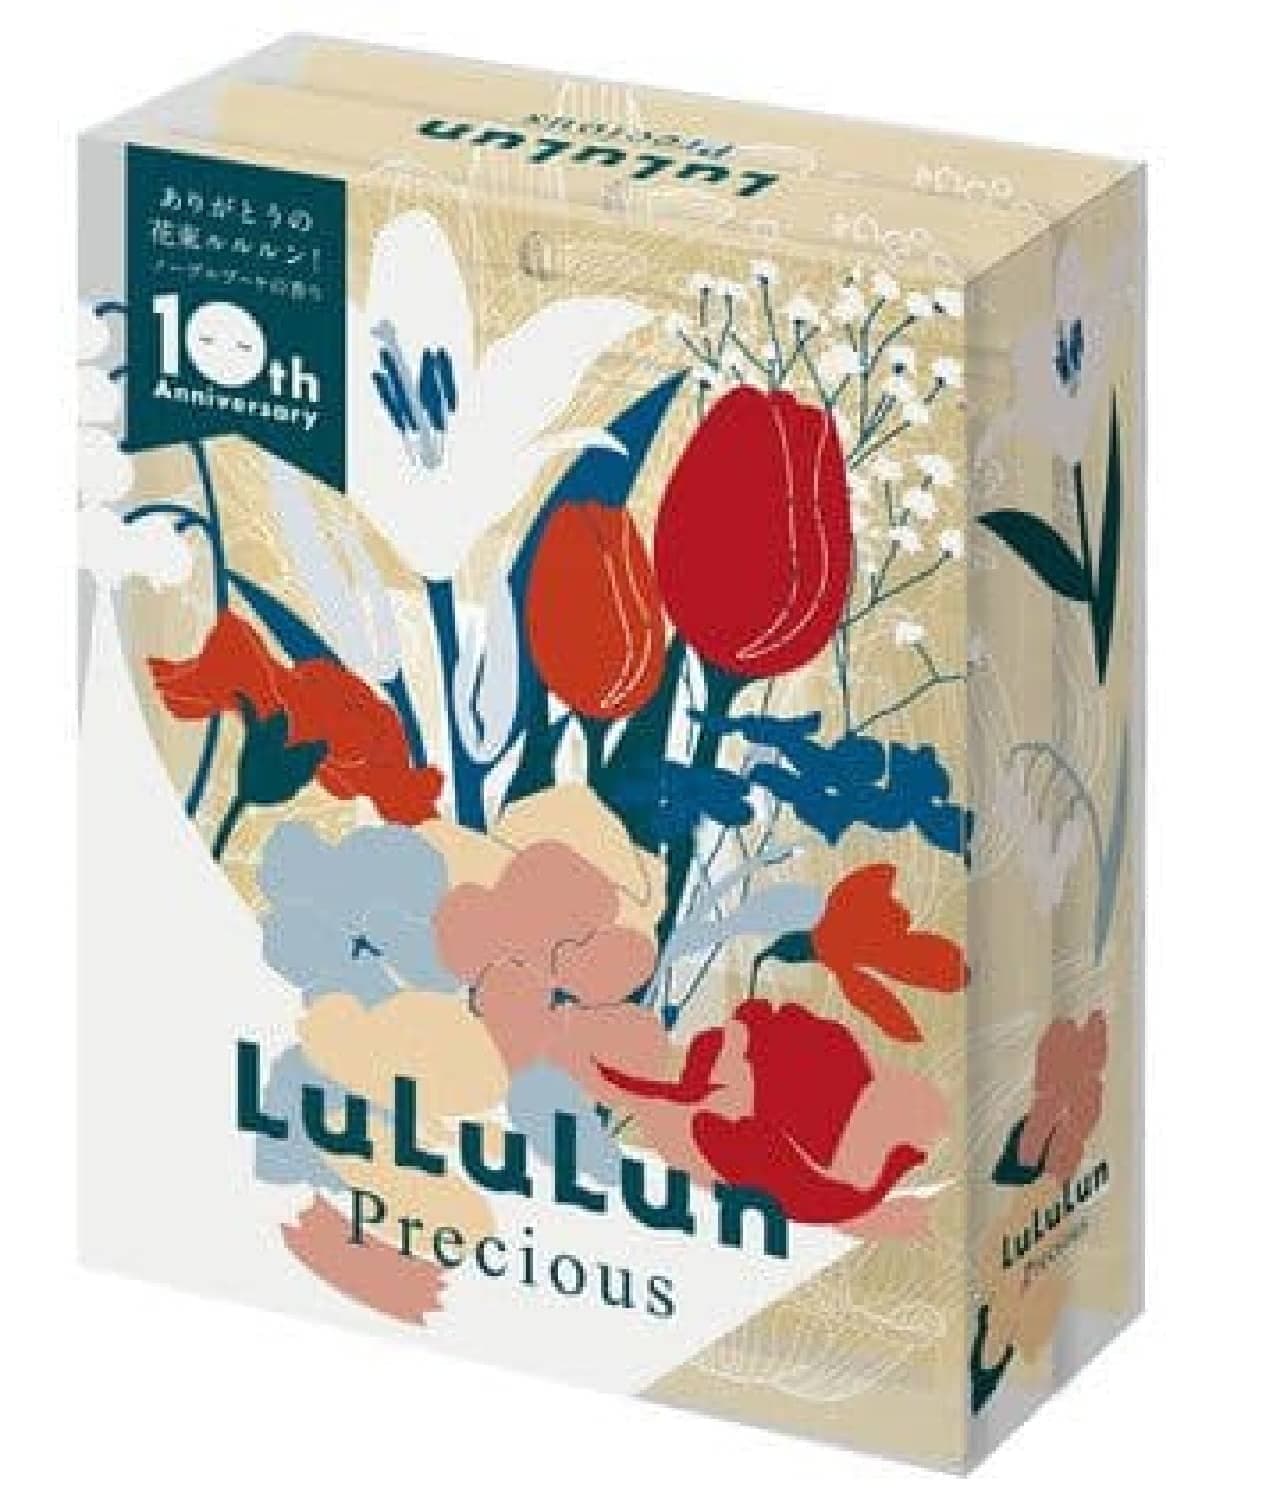 Thank you Lululun Precious (scent of Noble Bouquet)